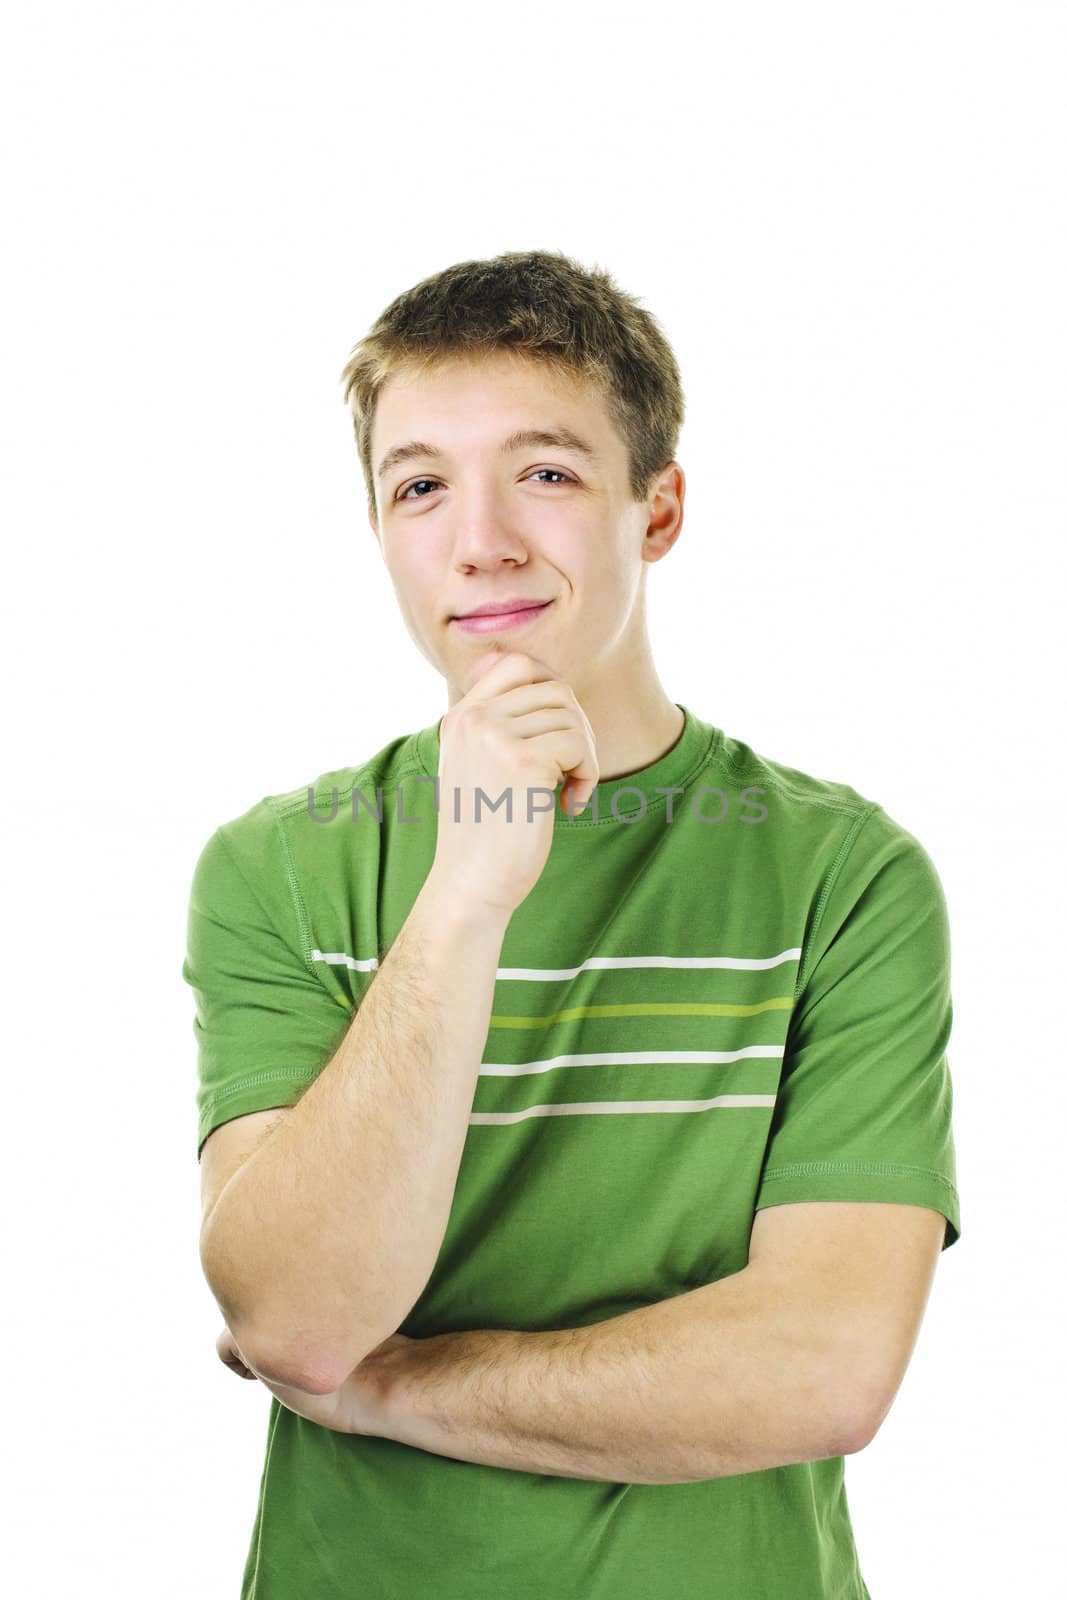 Smiling young man having an idea standing isolated on white background